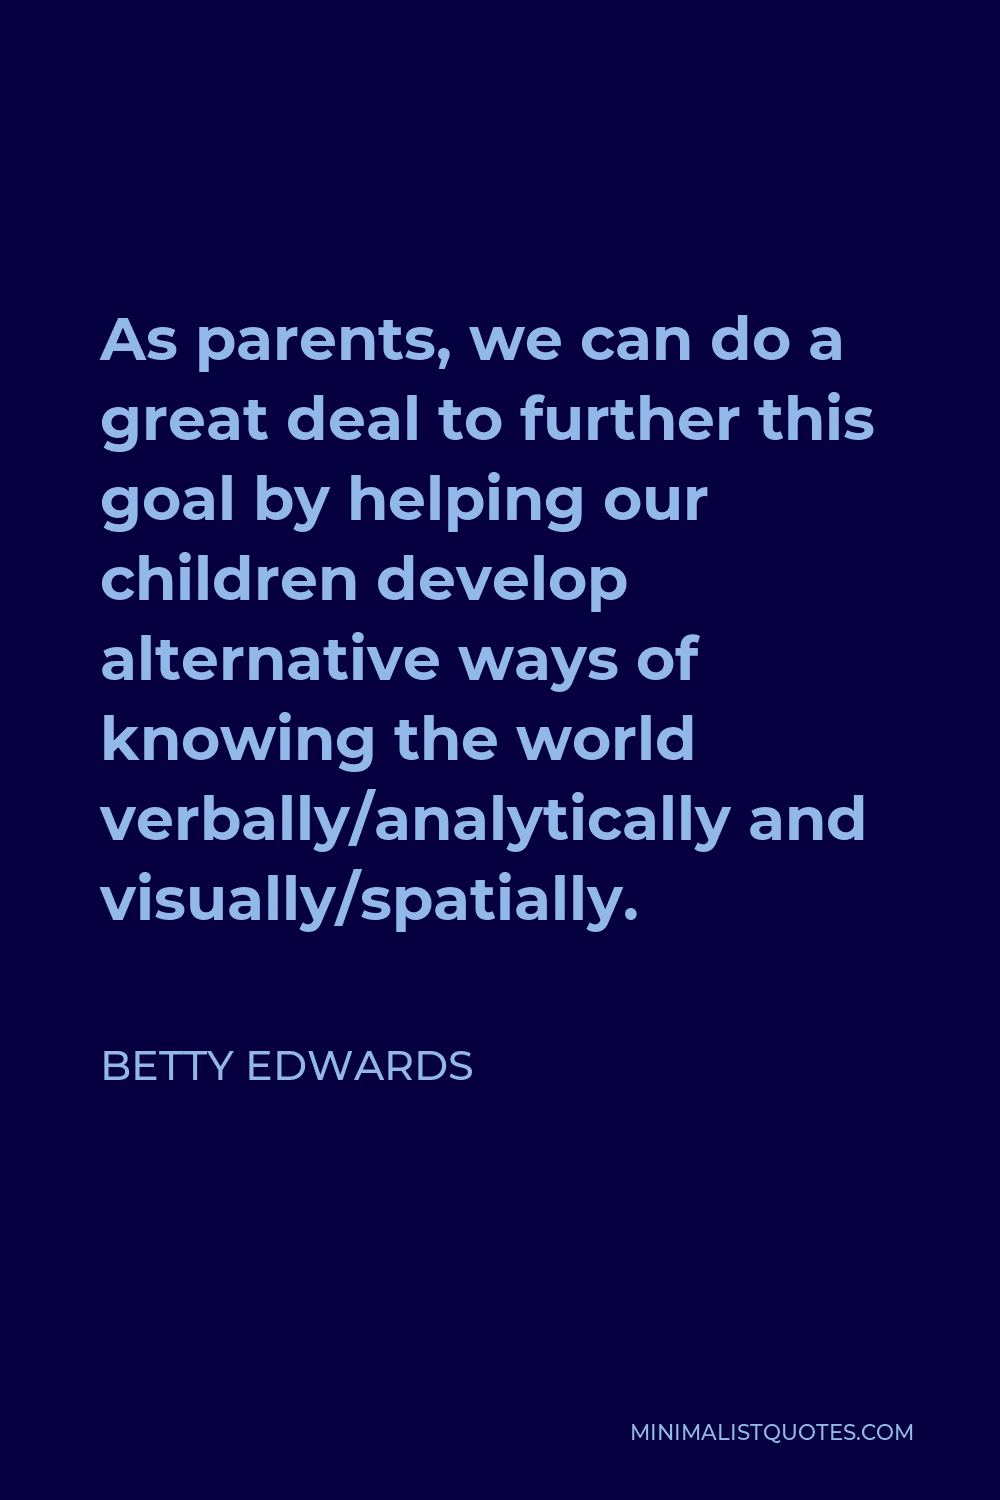 Betty Edwards Quote - As parents, we can do a great deal to further this goal by helping our children develop alternative ways of knowing the world verbally/analytically and visually/spatially.